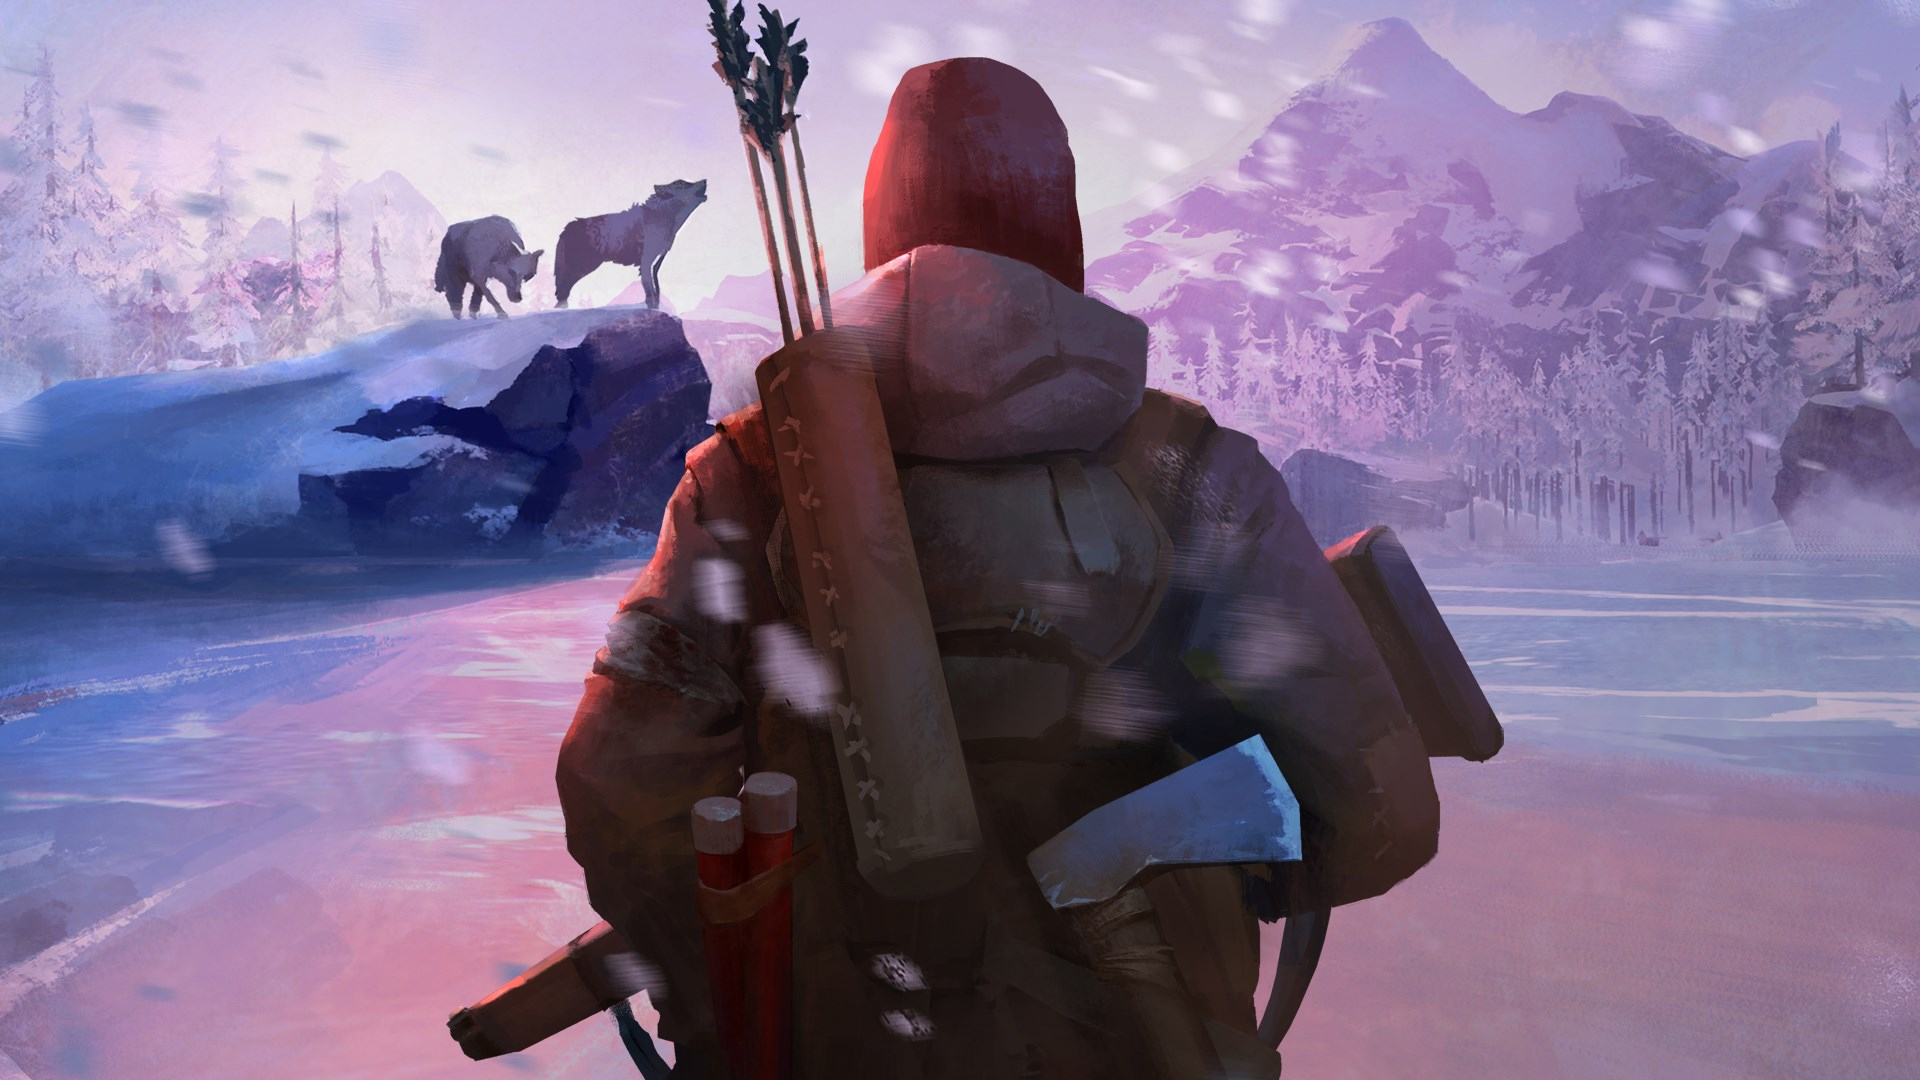 Survival game The Long Dark gets paid season pass this year